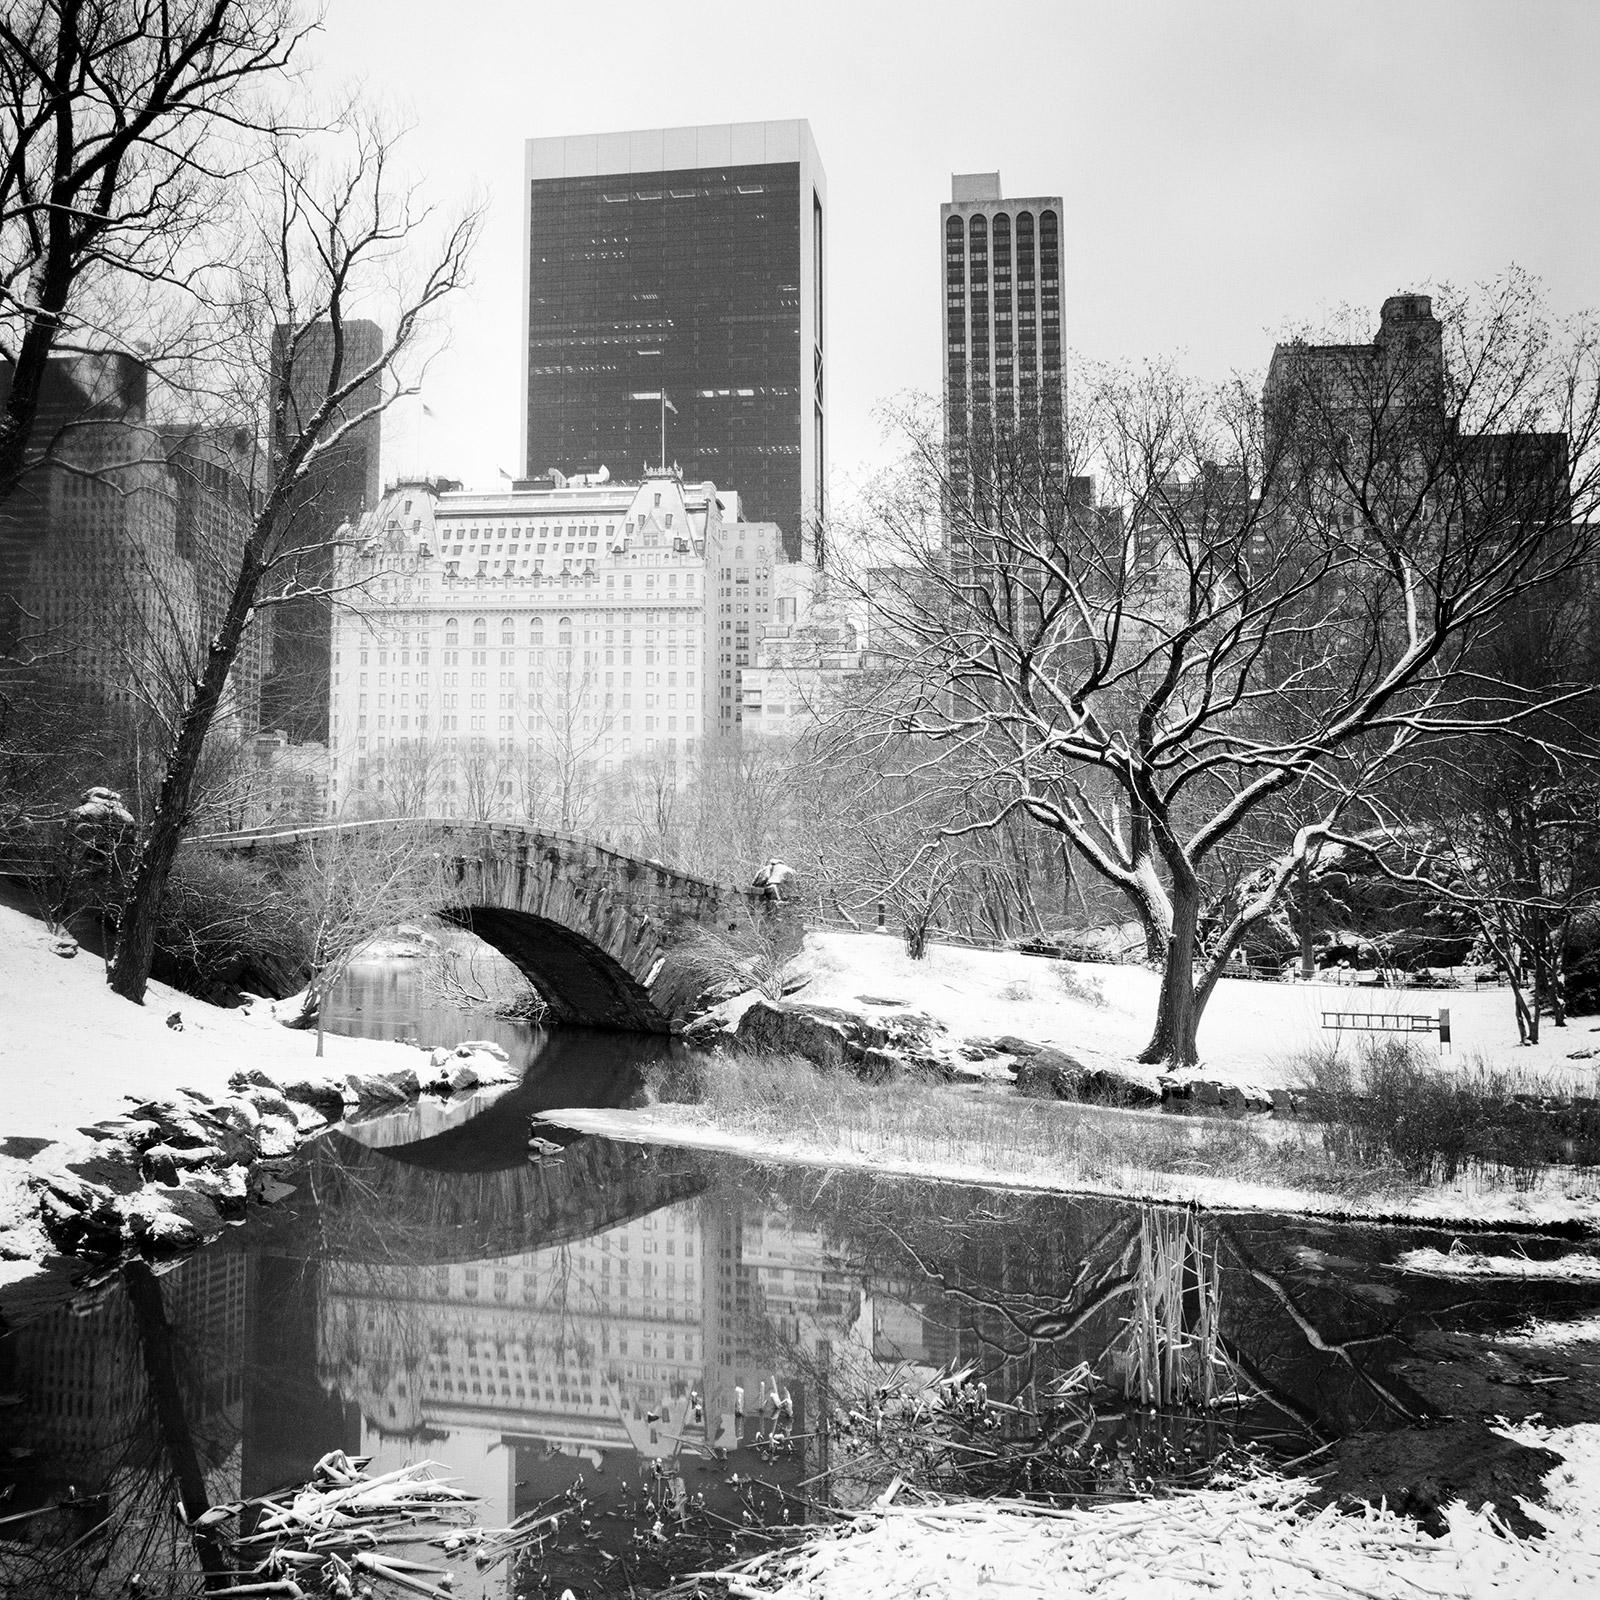 Snow covered Central Park, New York City, black and white photography landscapes